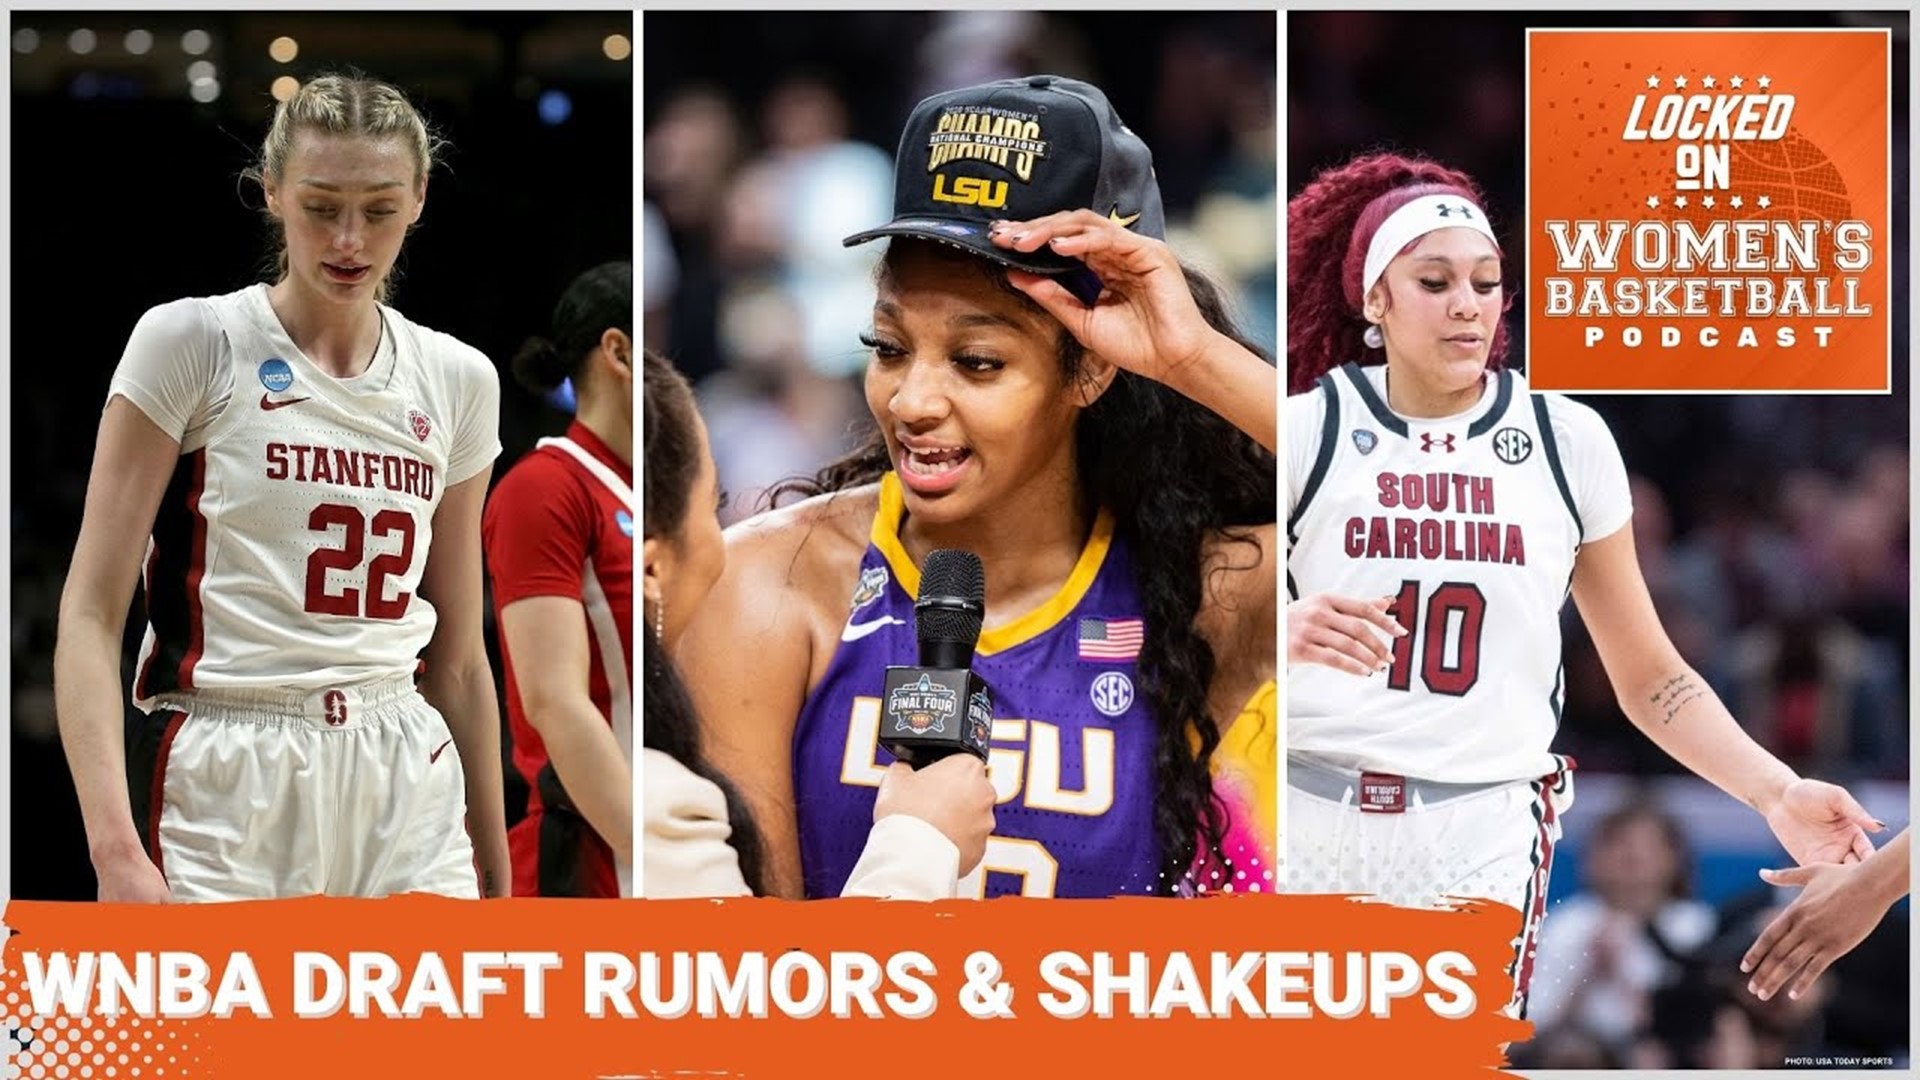 Host Jackie Powell is joined by The Athletic’s Sabreena Merchant for an episode predicated on the WNBA rumor mill prior to Monday night’s draft.